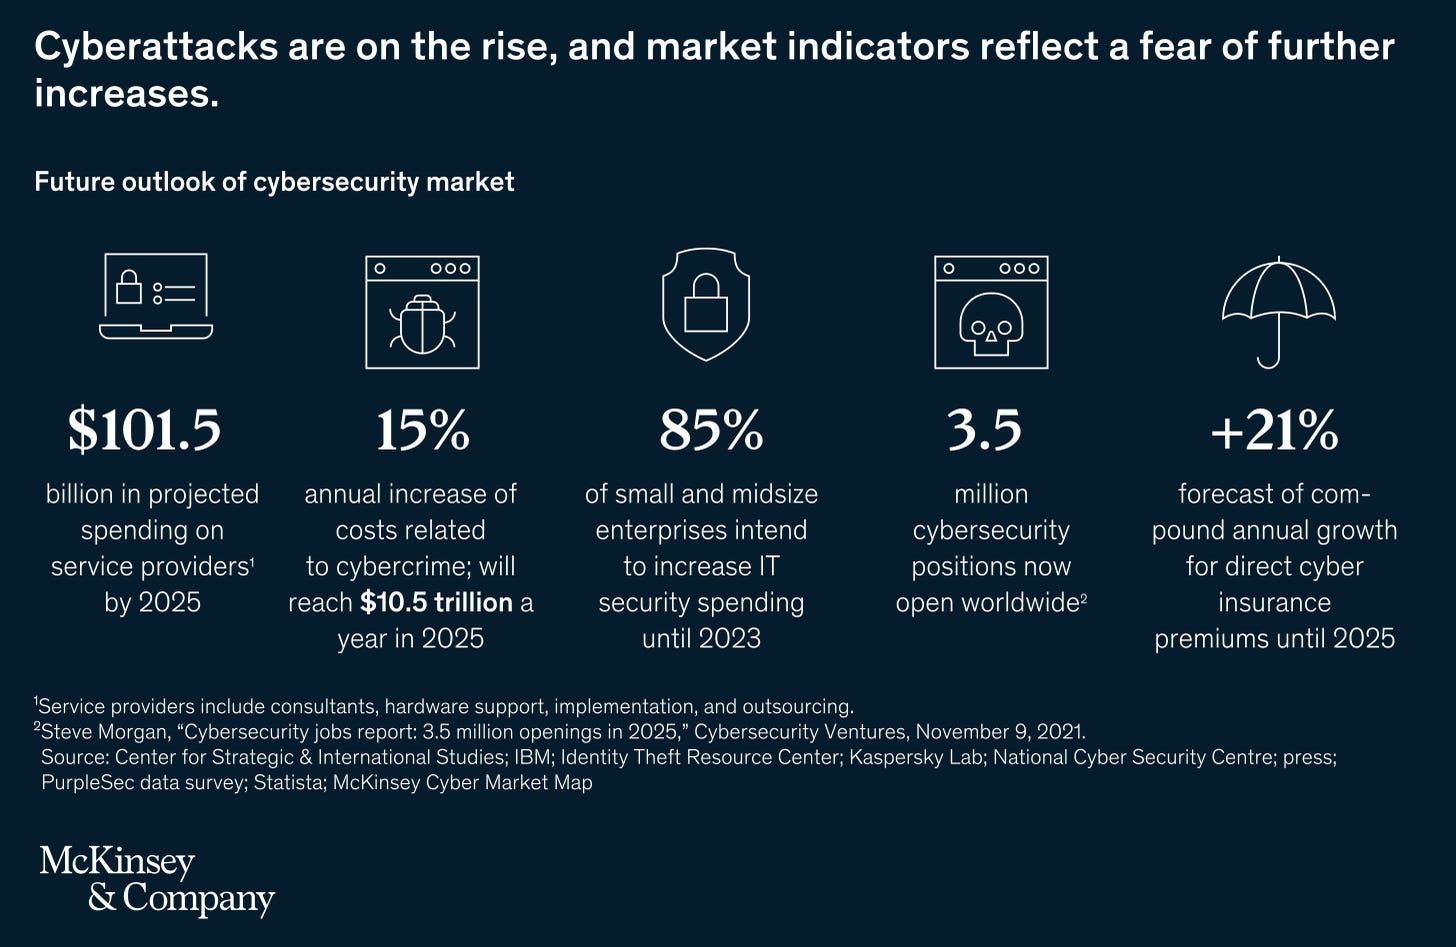 Cyberattacks are on the rise, and market indicators reflect a fear of further increases.